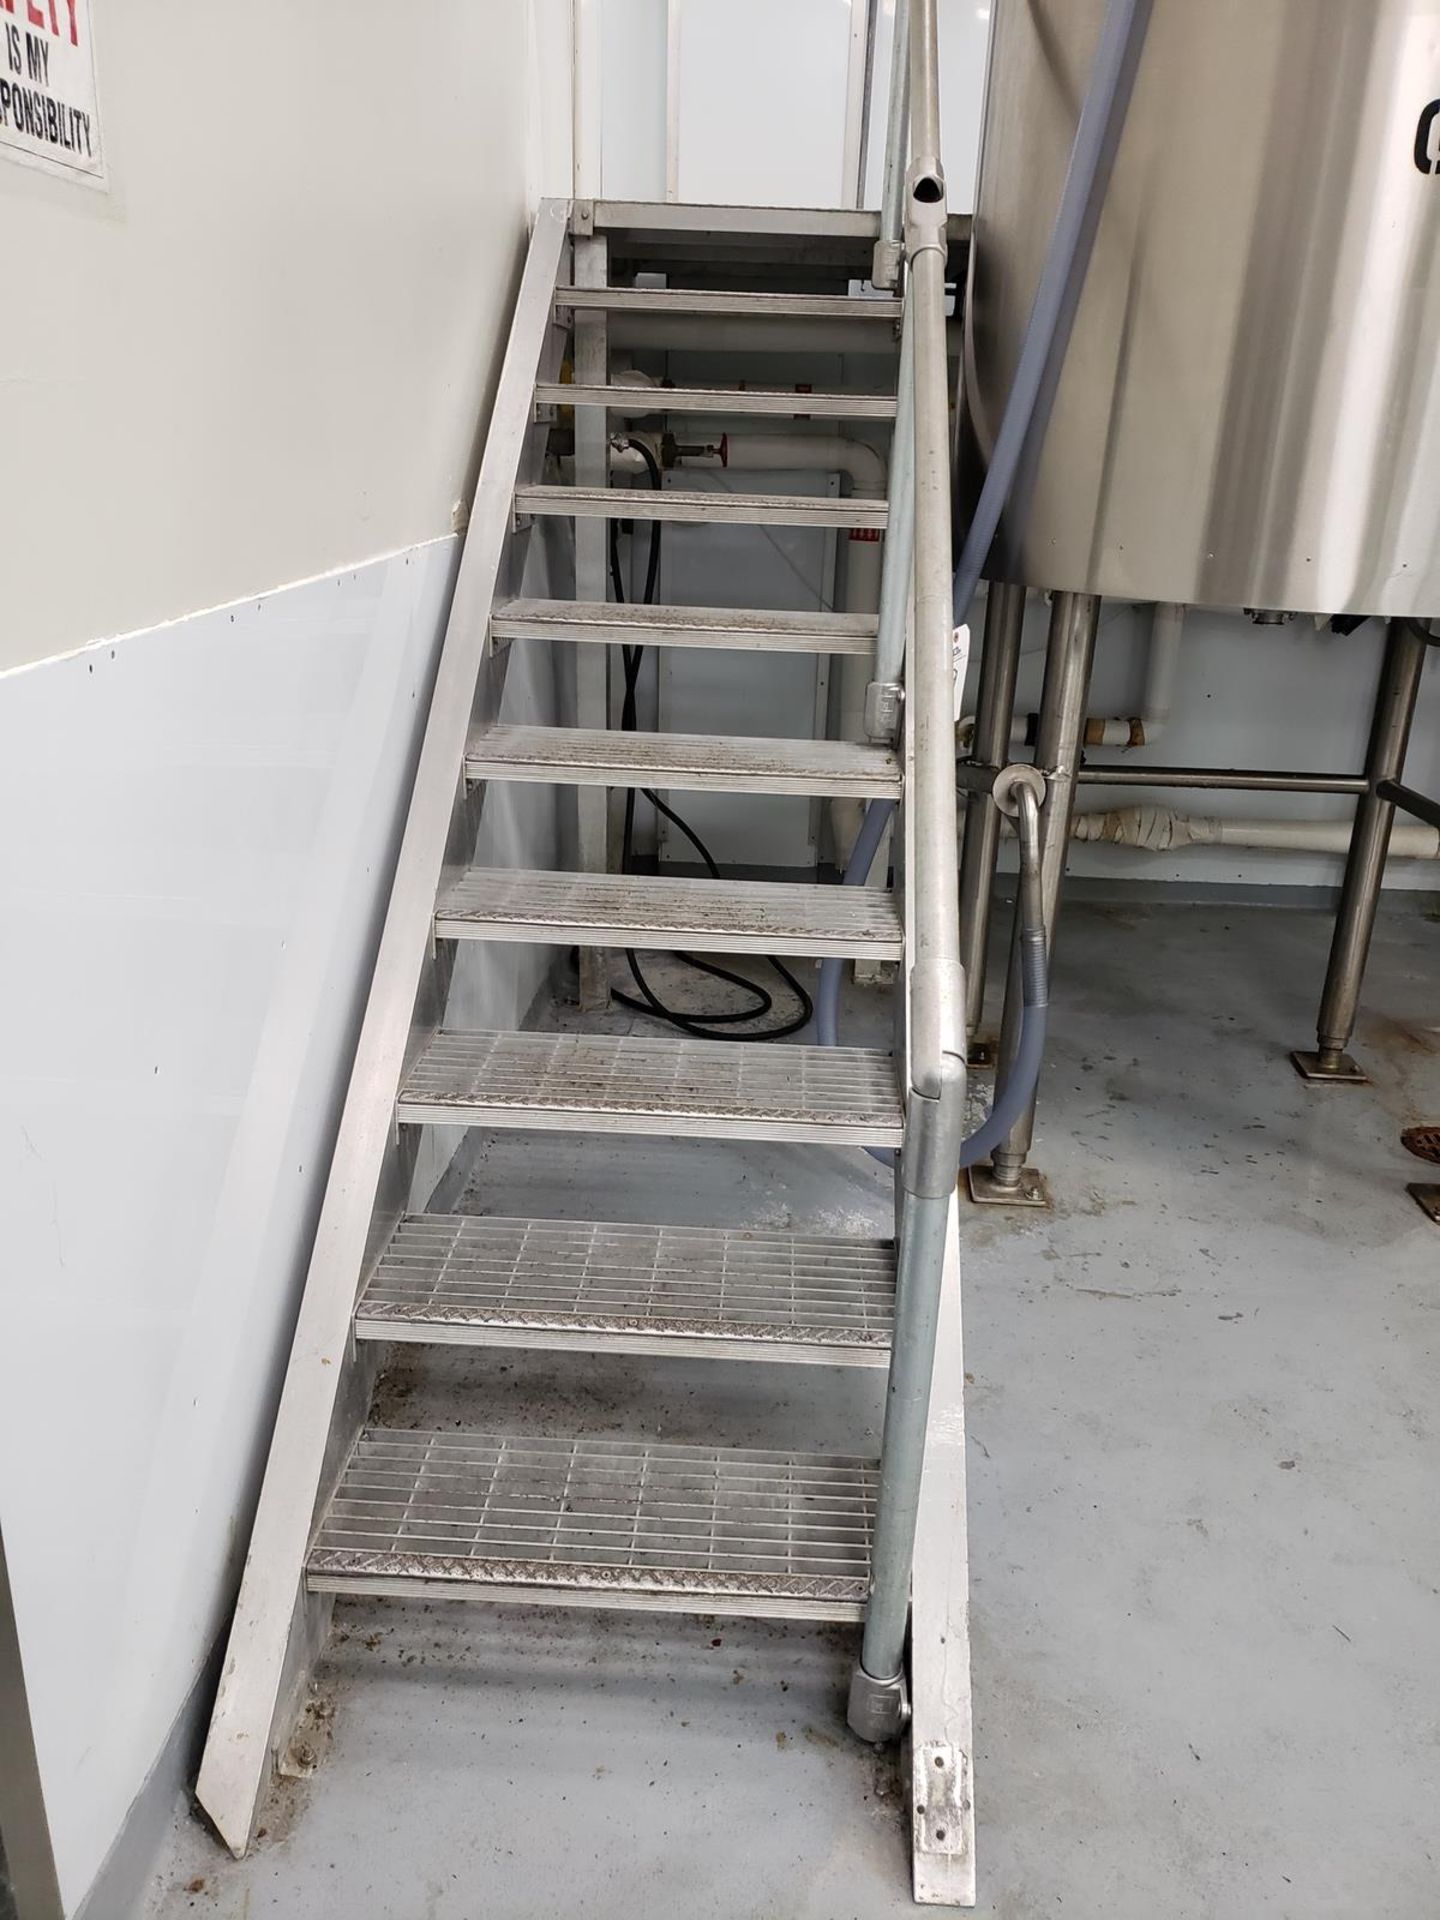 STAINLESS STEEL PLATFORM FOR TANK LOTS 4 & 5 - 4' X 22' X 81" TALL, WITH STEPS | Reqd Rig Fee: $400 - Image 2 of 4